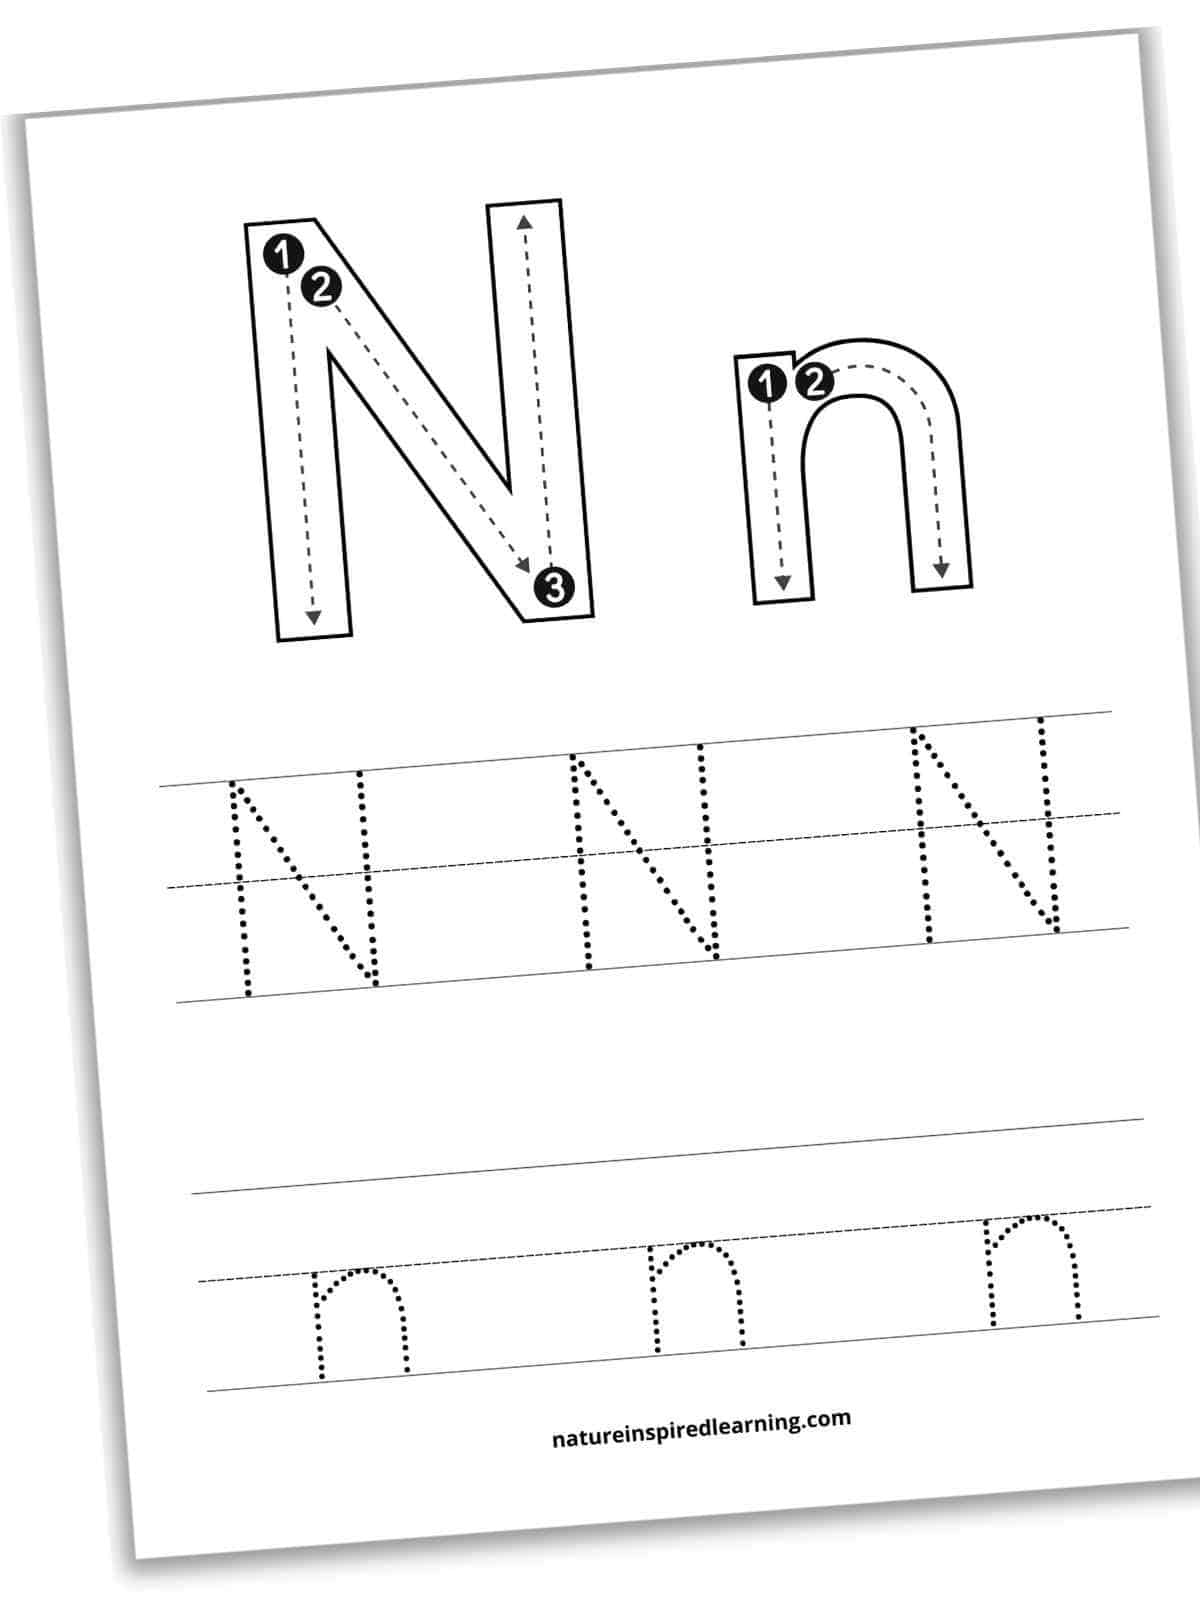 Black and white worksheet with large N n in outline form with guidelines, arrows, and numbers for tracing within each above two sets of lines with letter n's in a dotted font